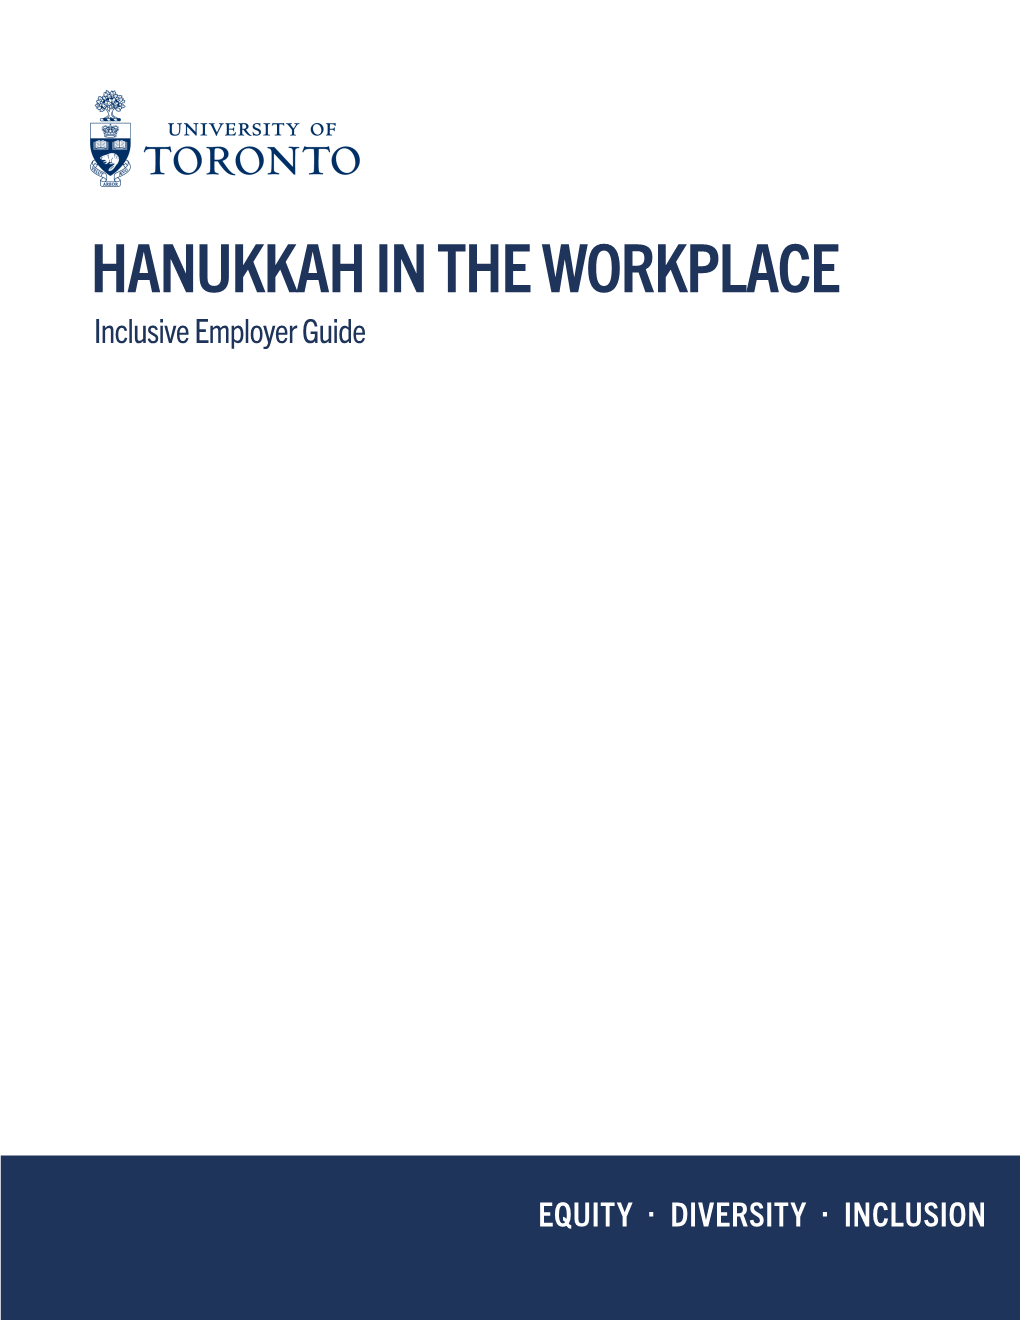 HANUKKAH in the WORKPLACE Inclusive Employer Guide